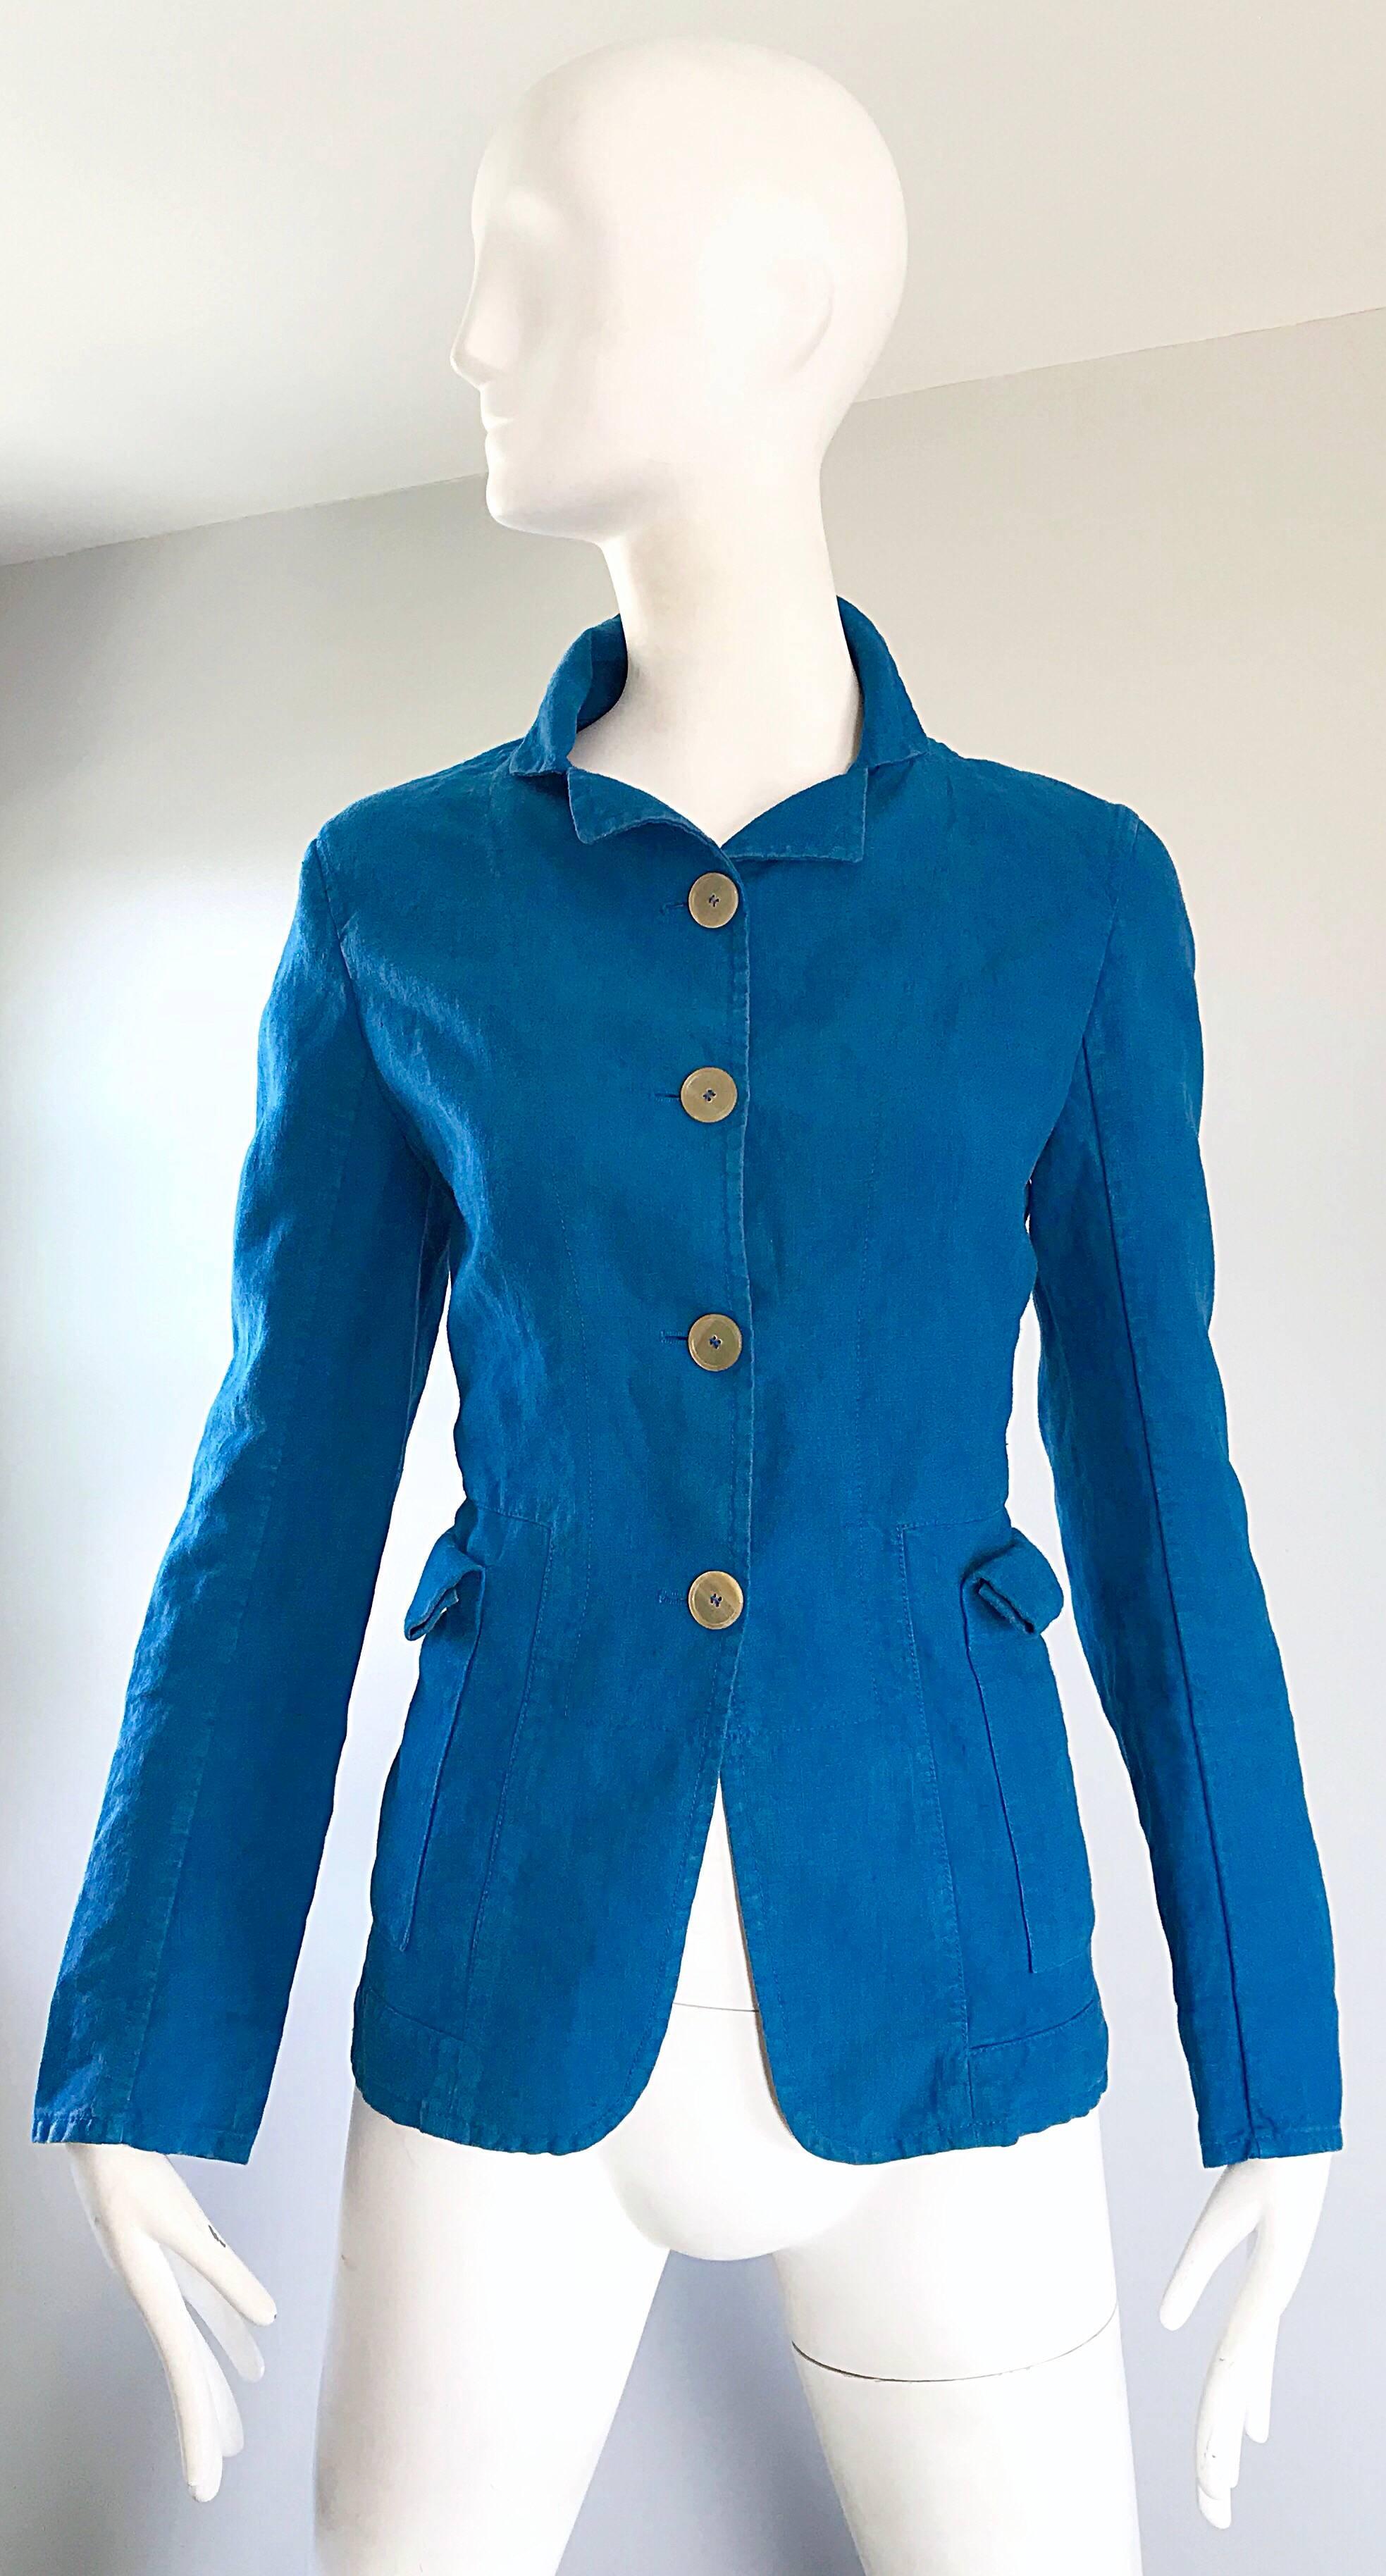 Wonderful 90s JIL SANDER turquoise blue fitted jacket! Smart tailored fit looks amazing on. Four ivory buttons up the front. Cargo pocket at each side of the hips Velcro shut. The perfect weight material for any time of year! Can easily be dressed